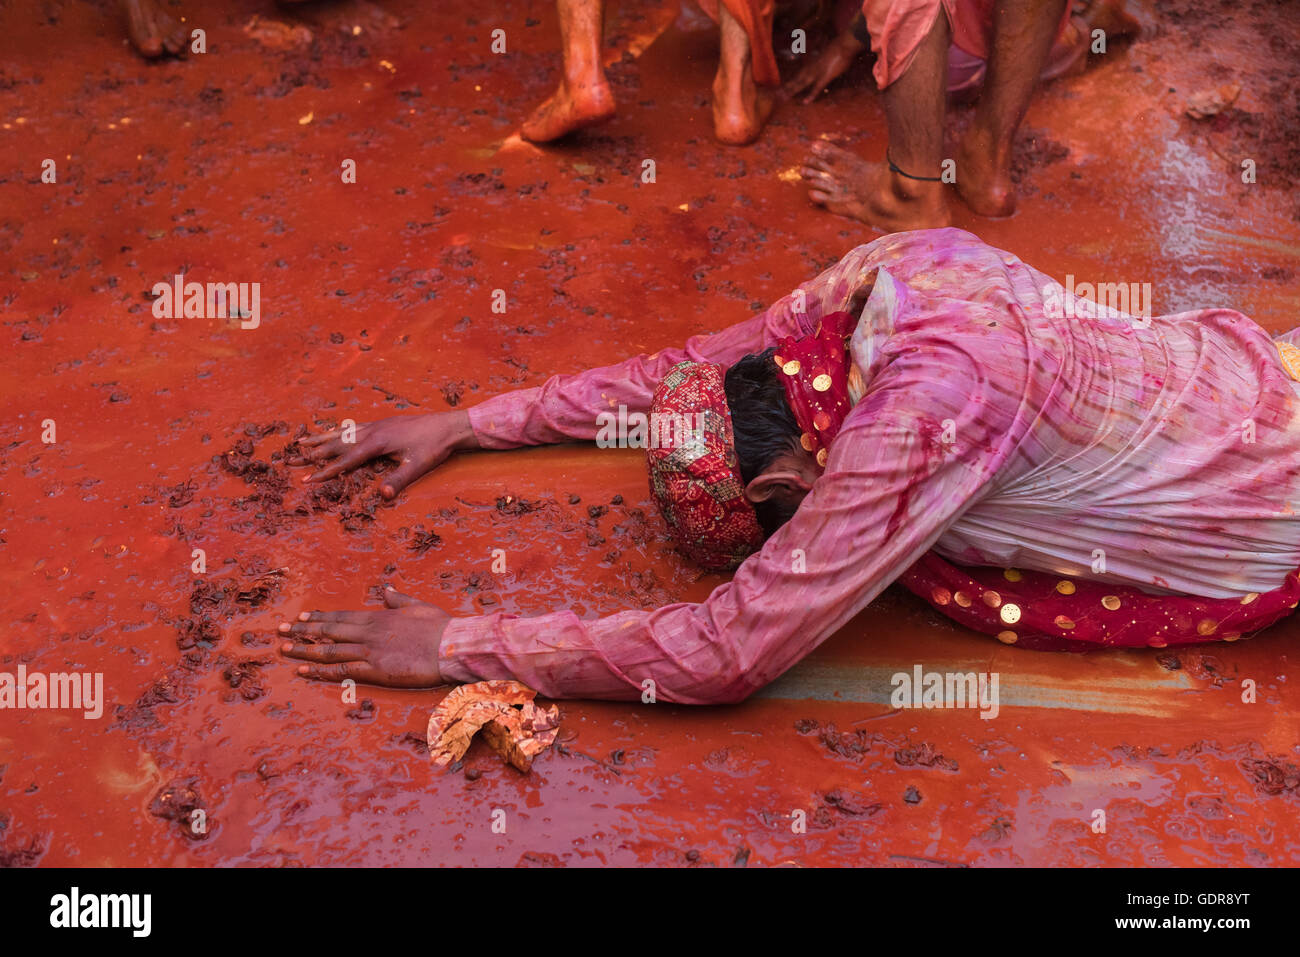 Nandgaon, India - March 10, 2014: Young male collecting flowers from ground and praying during holi celebration at temple. Stock Photo